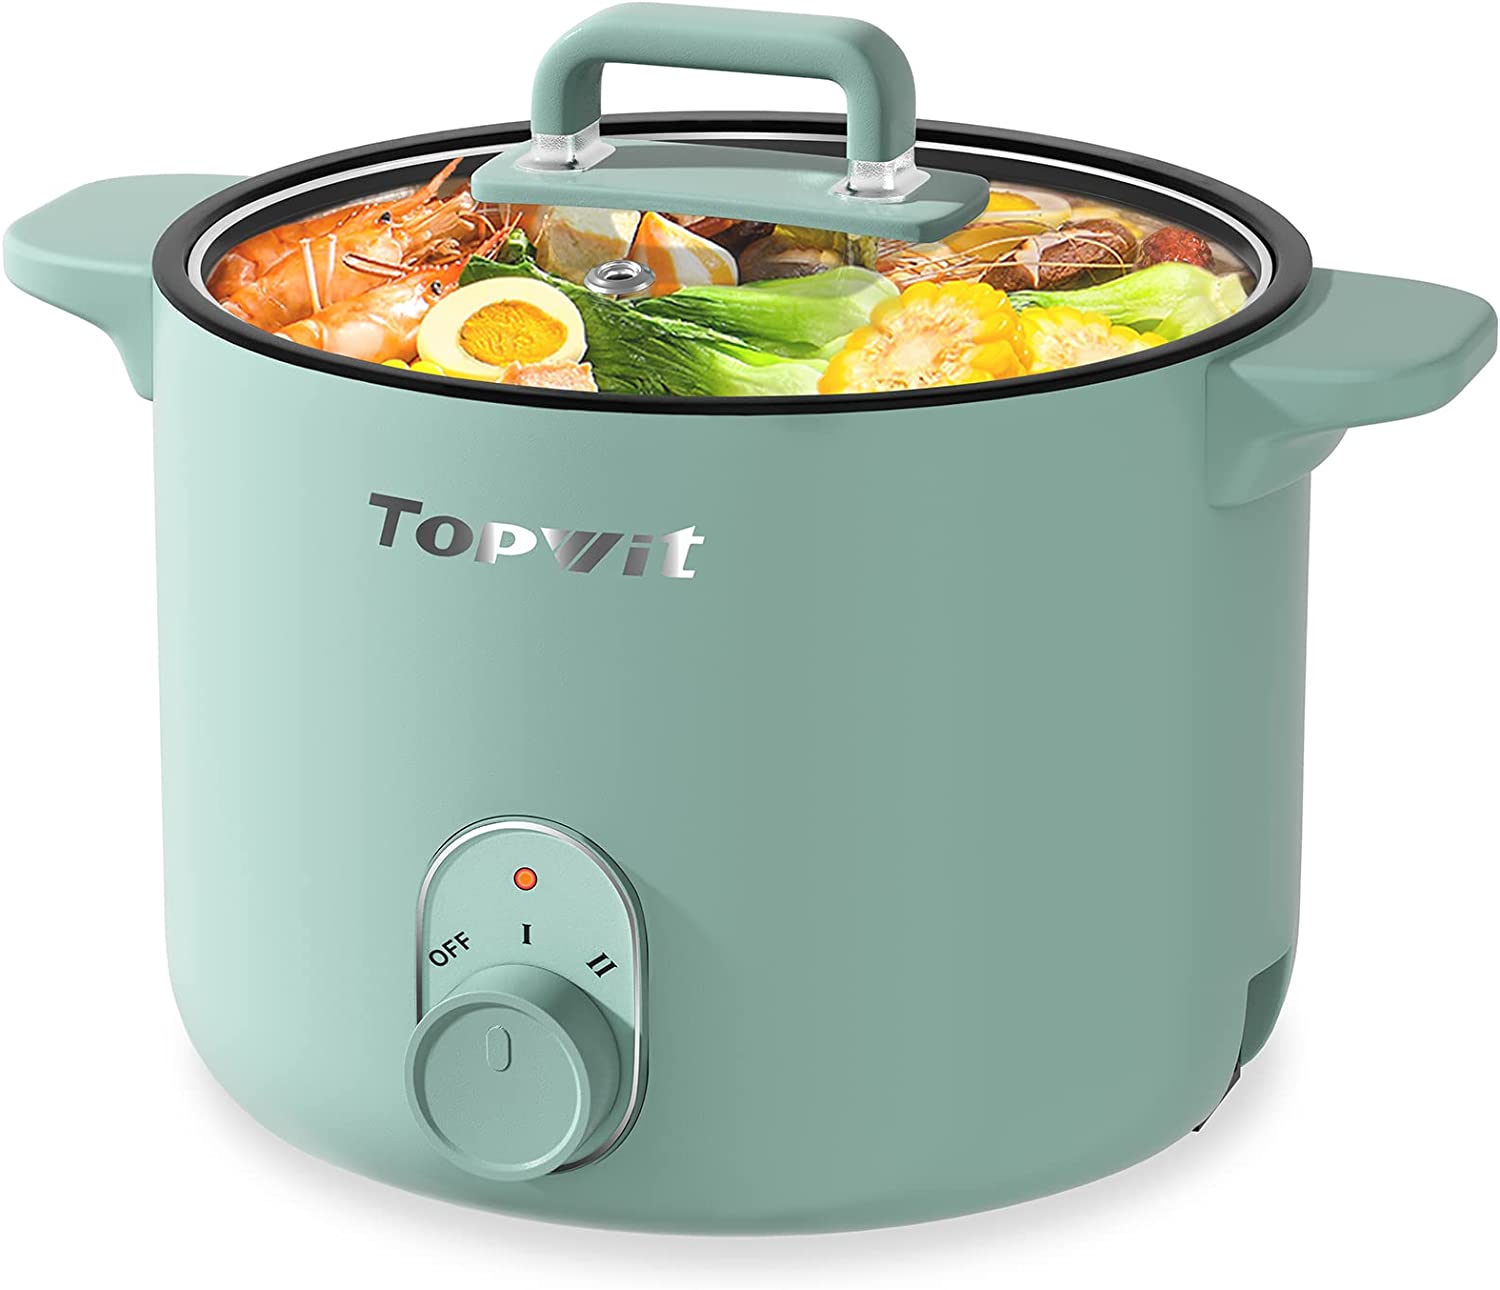 Topwit Electric Hot Pot Mini 1.2 Liter Electric Cooker Review